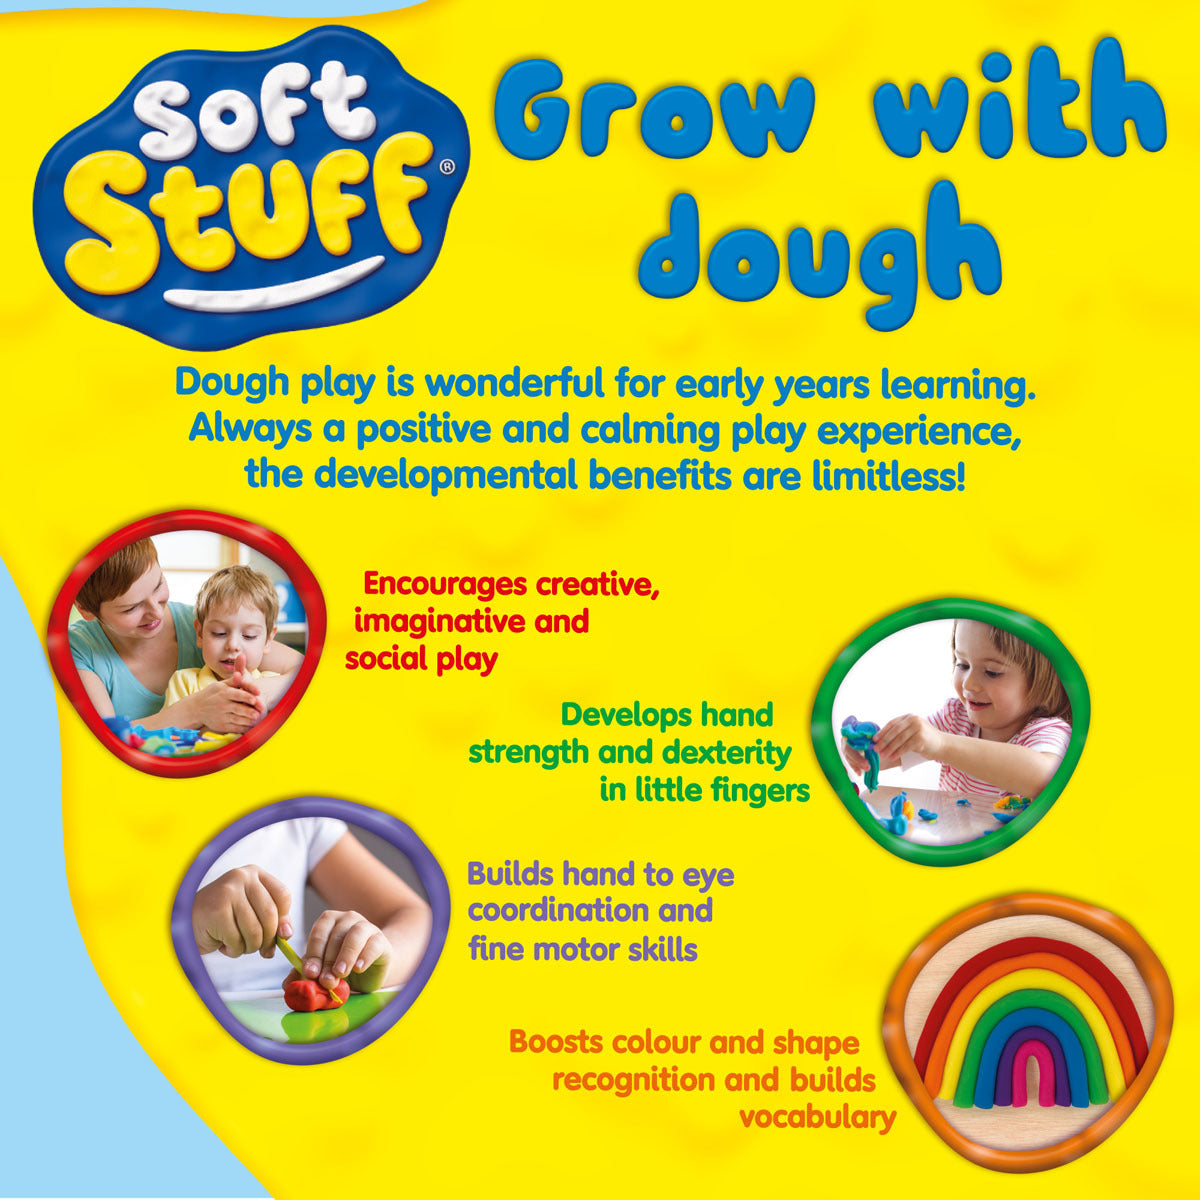 Soft Stuff Colourful Dough Collection